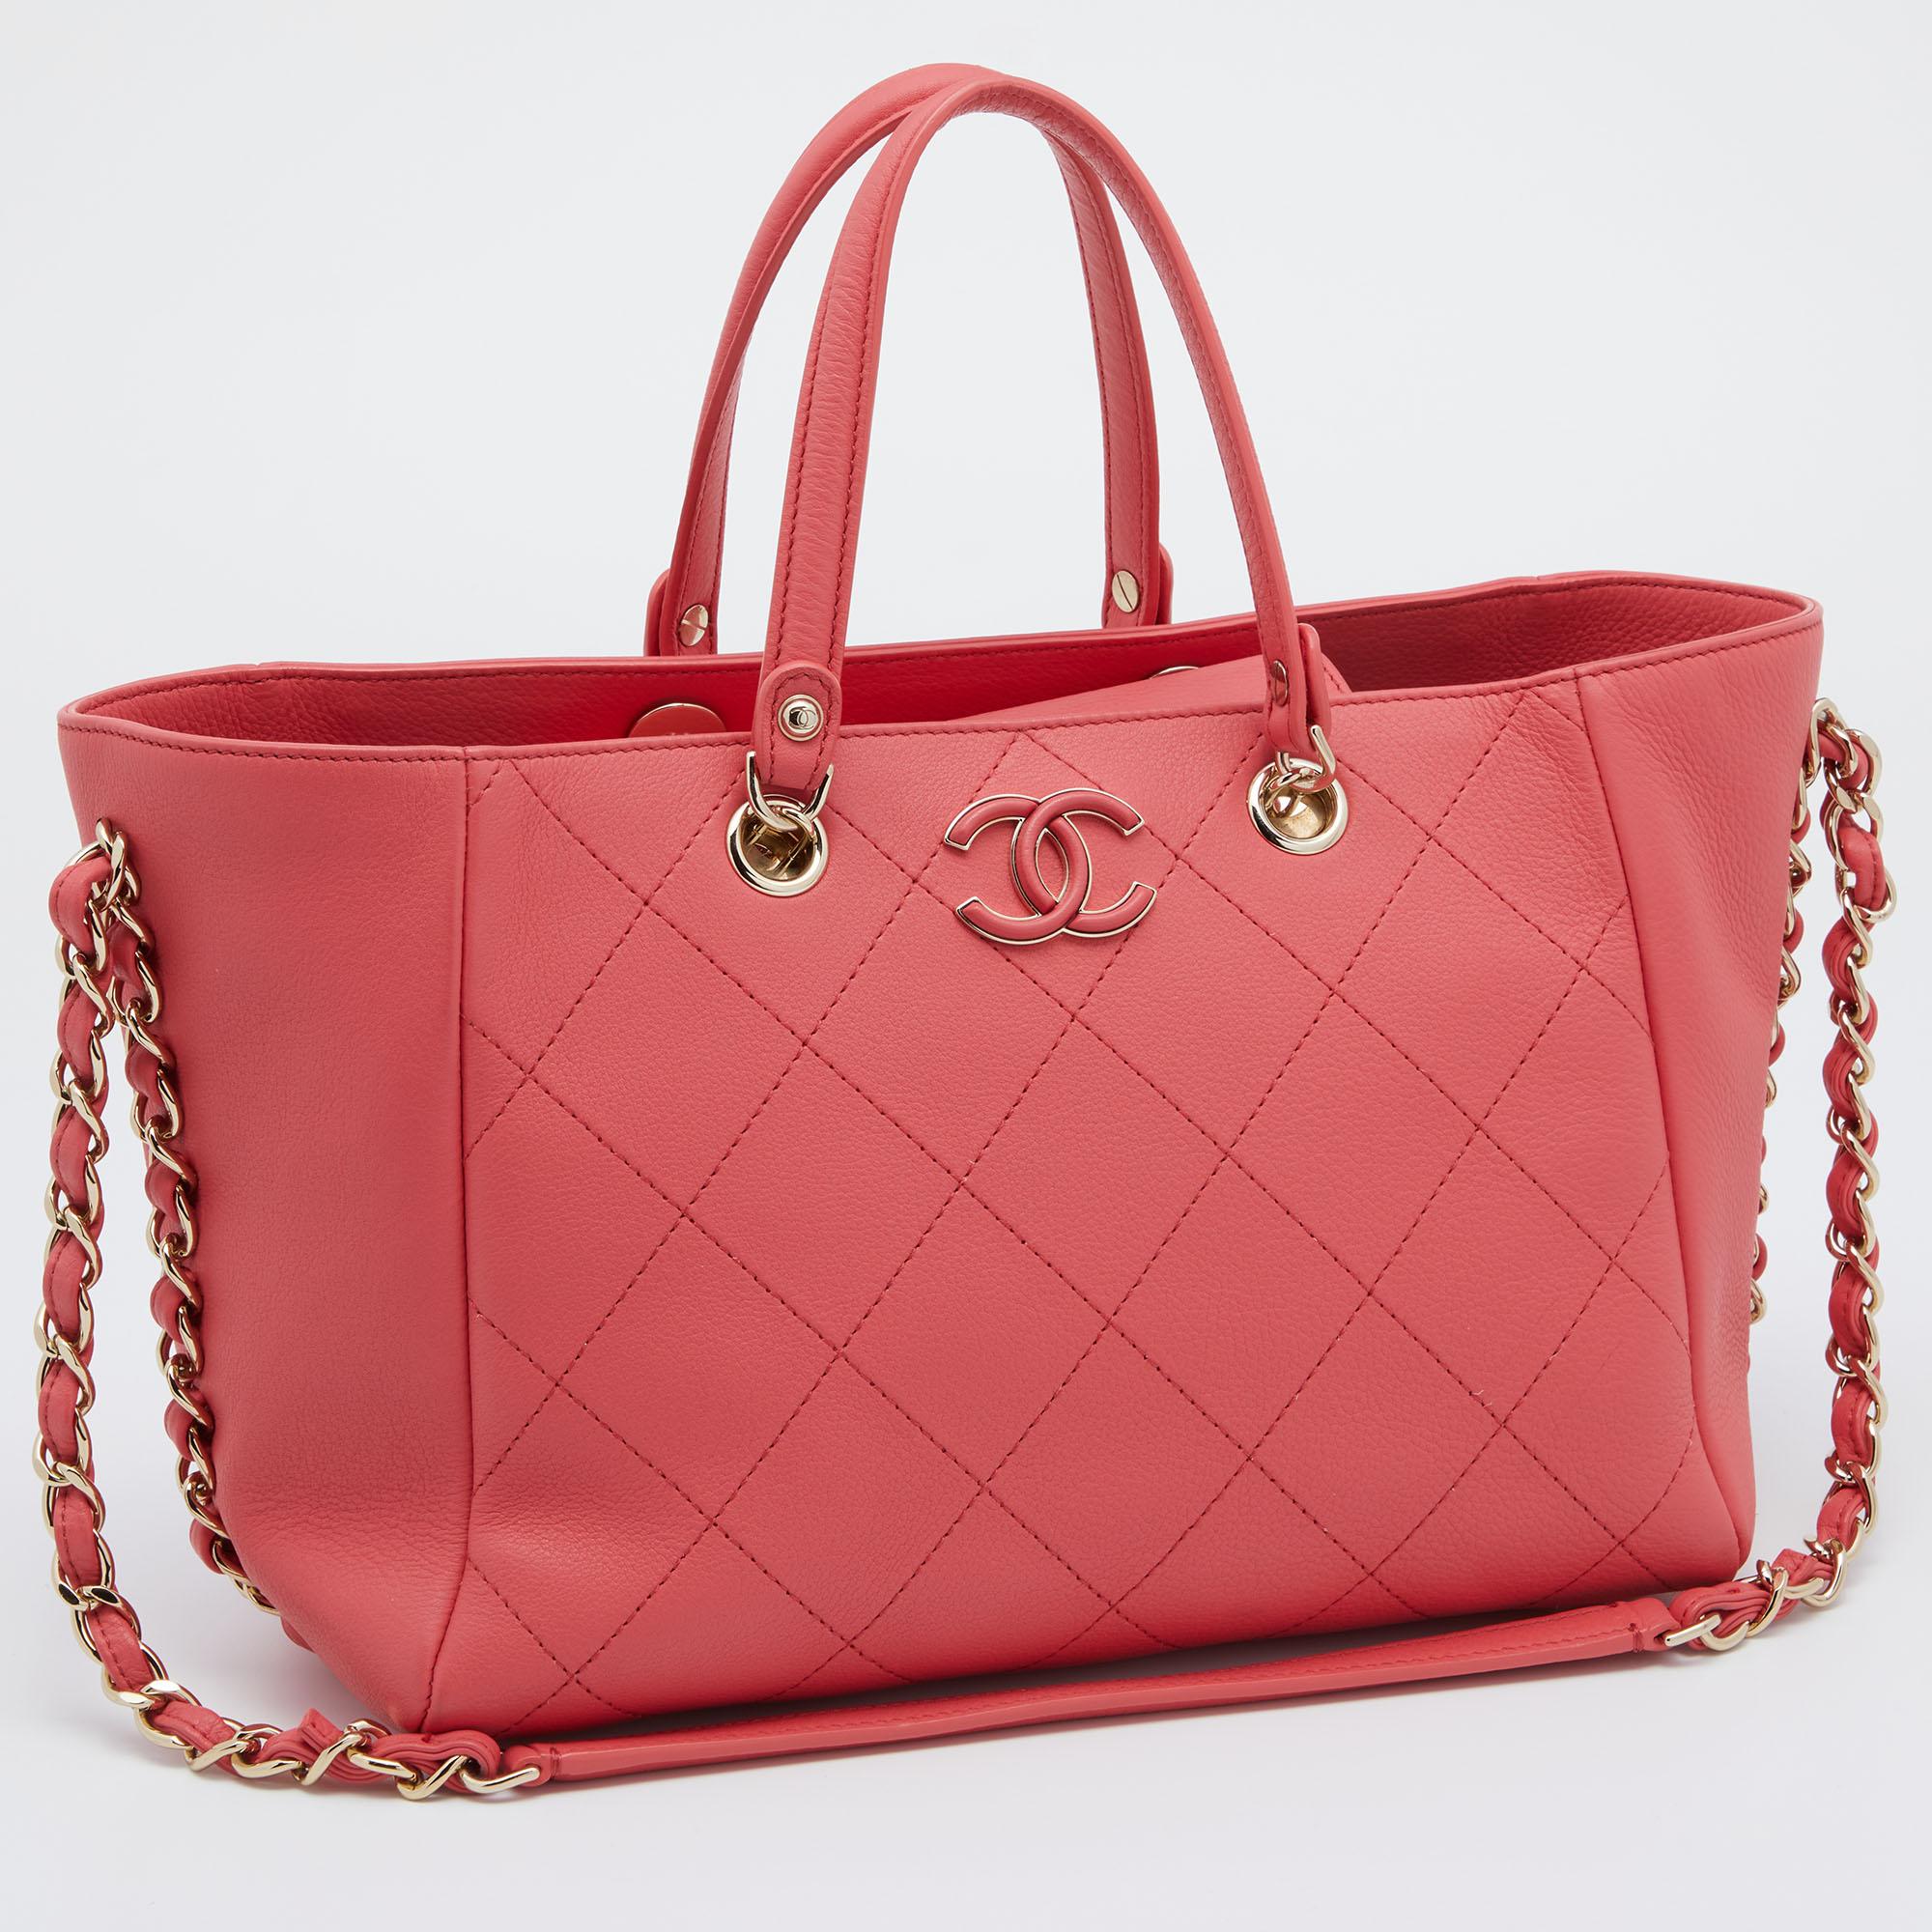 Women's Chanel Pink Quilted Leather Small Neo Soft Shopping Tote